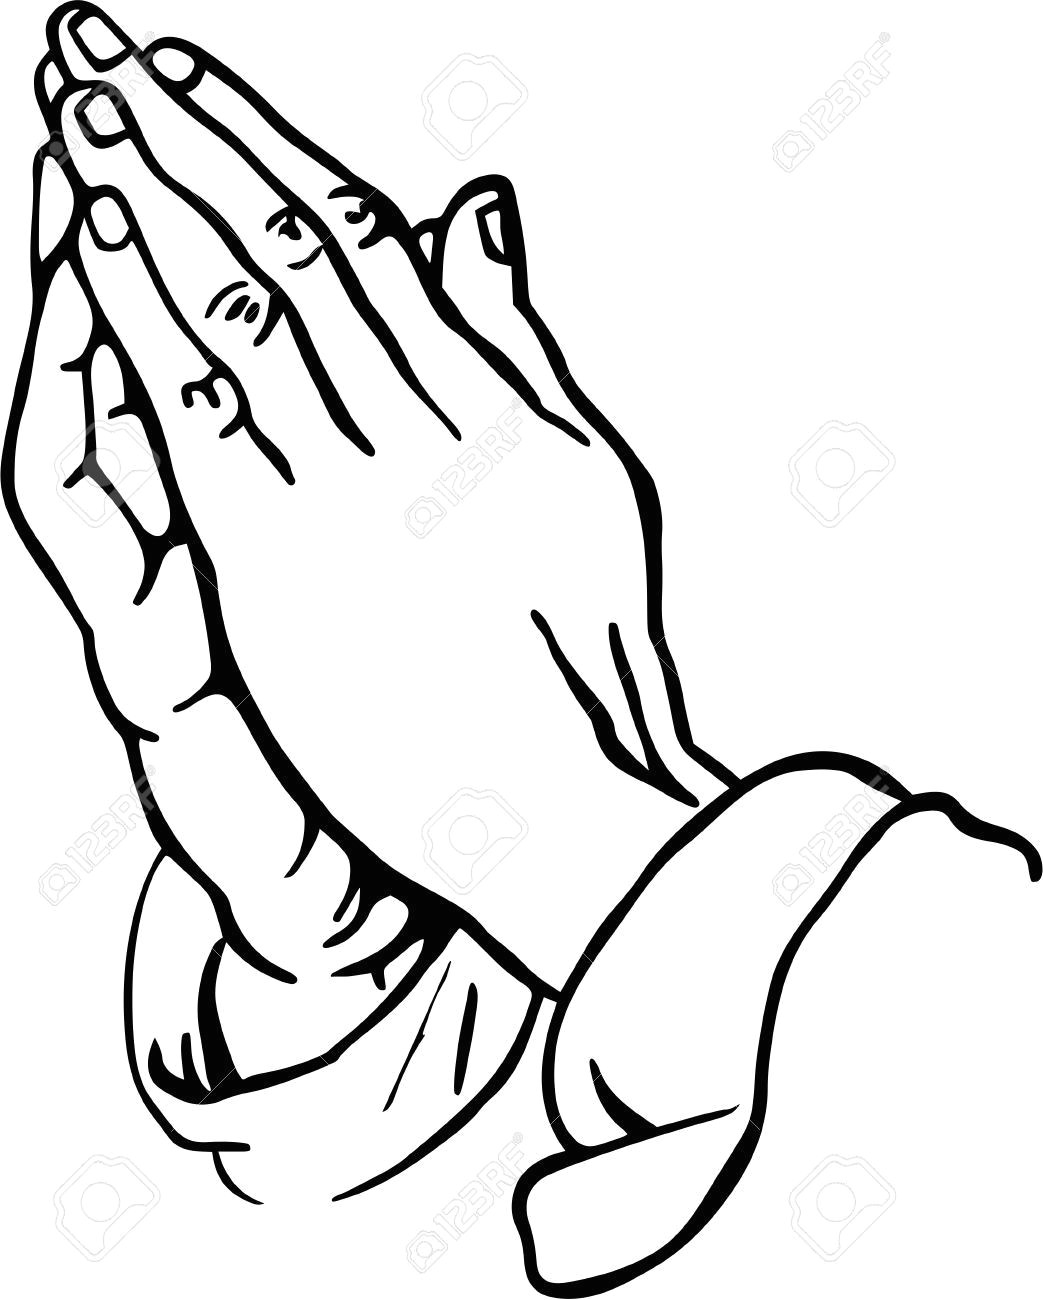 Drawings Of Folded Hands Praying Hands Clipart Prints Svg S Board 2 Praying Hands